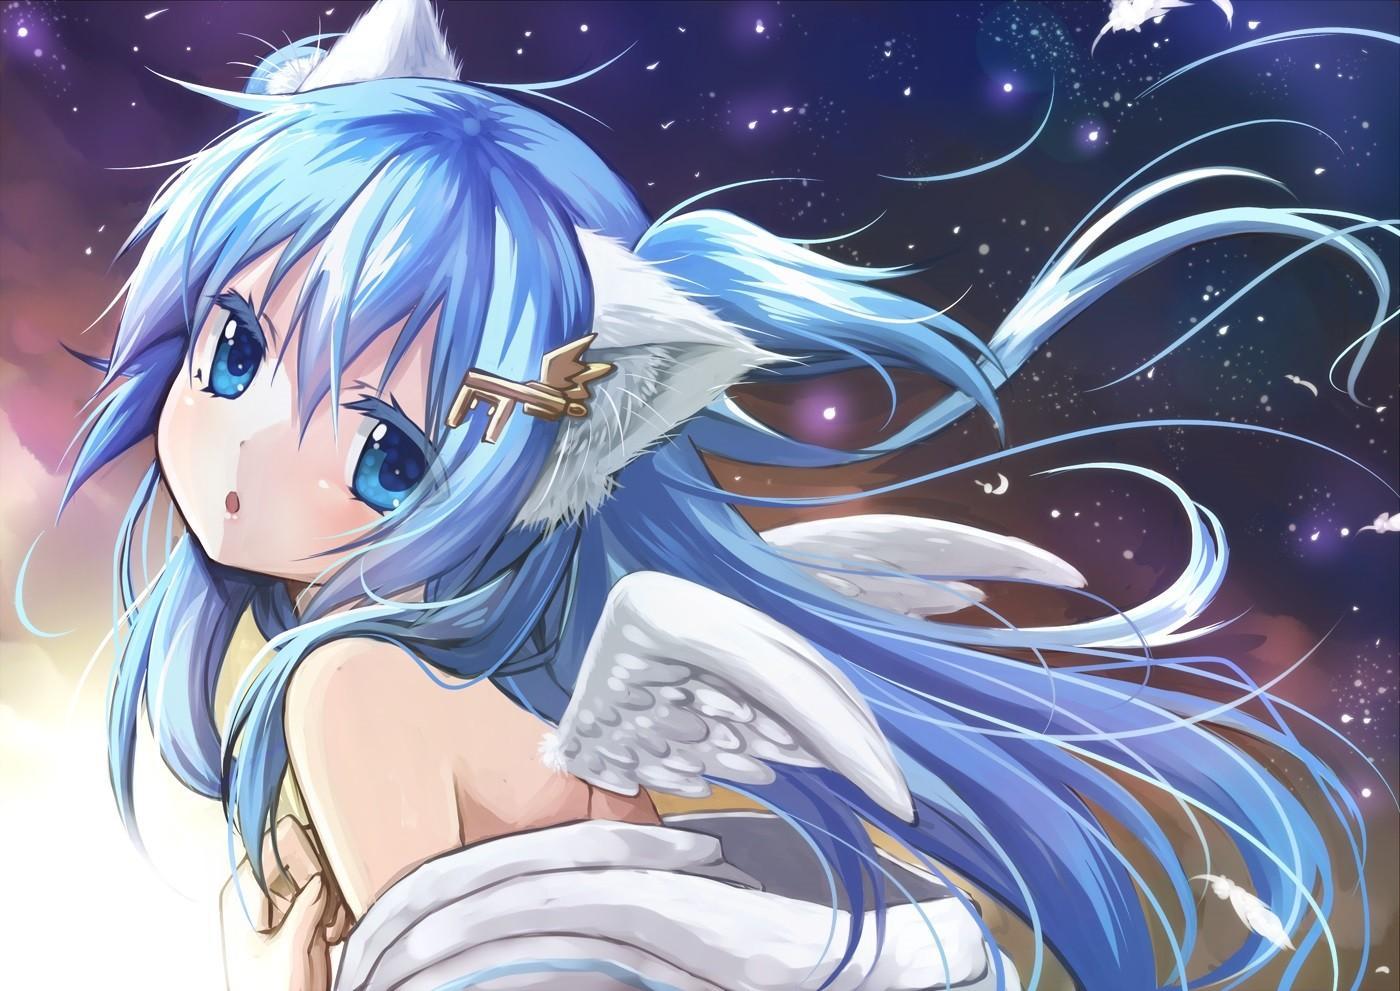 1. Blue-haired anime girl with curly hair - wide 4